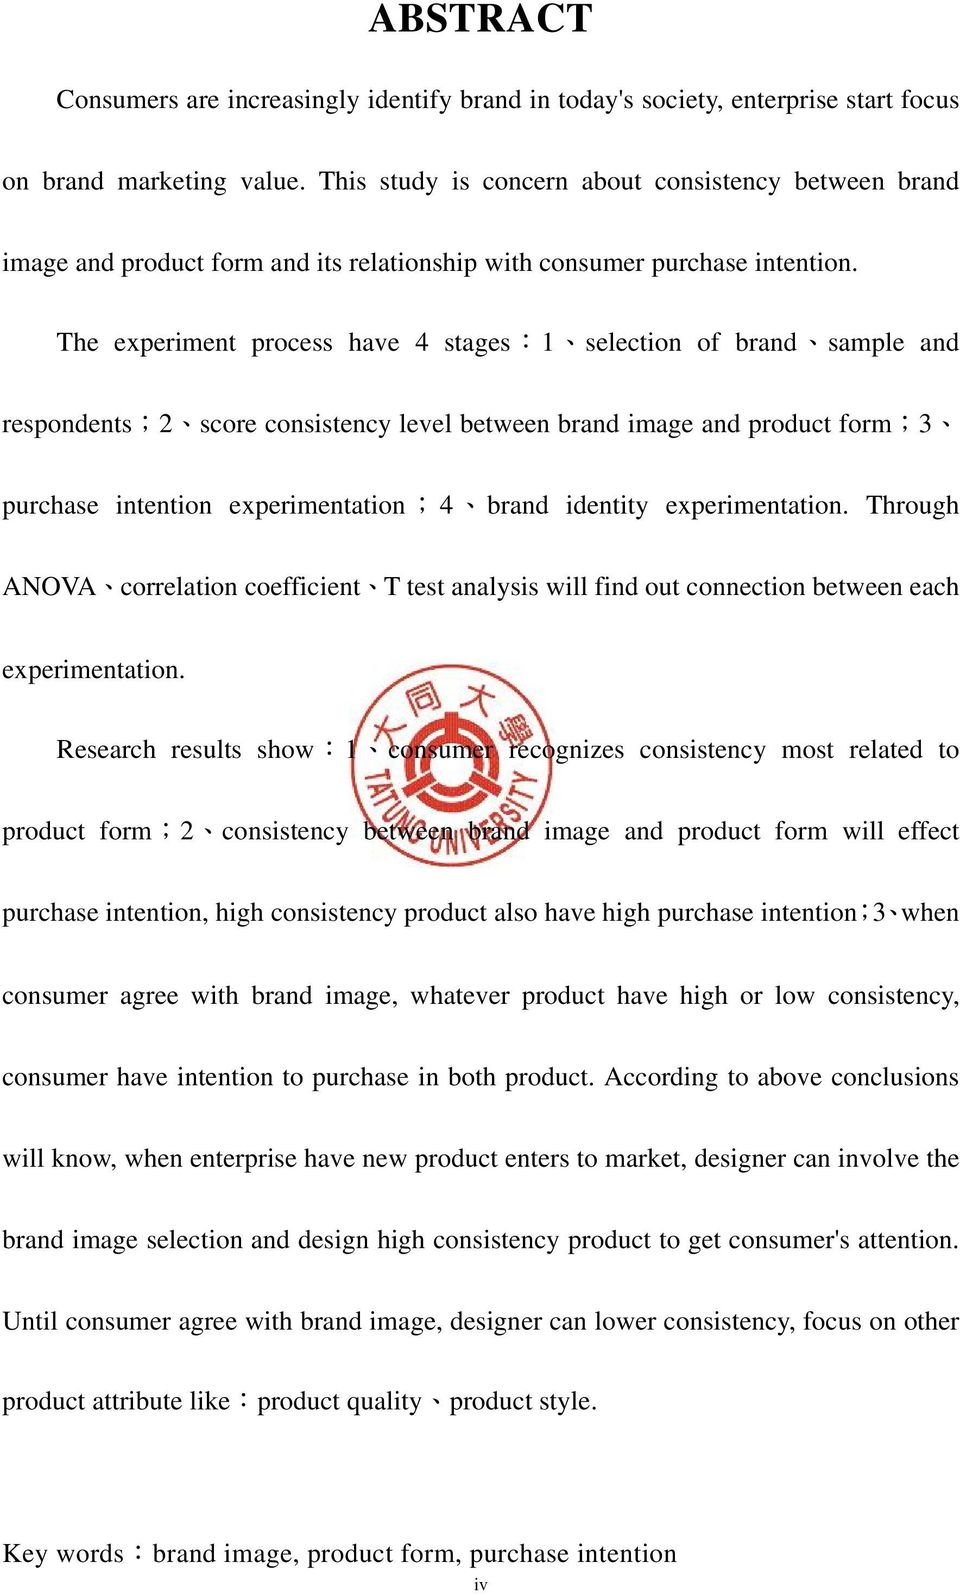 The experiment process have 4 stages:1 selection of brand sample and respondents;2 score consistency level between brand image and product form;3 purchase intention experimentation;4 brand identity